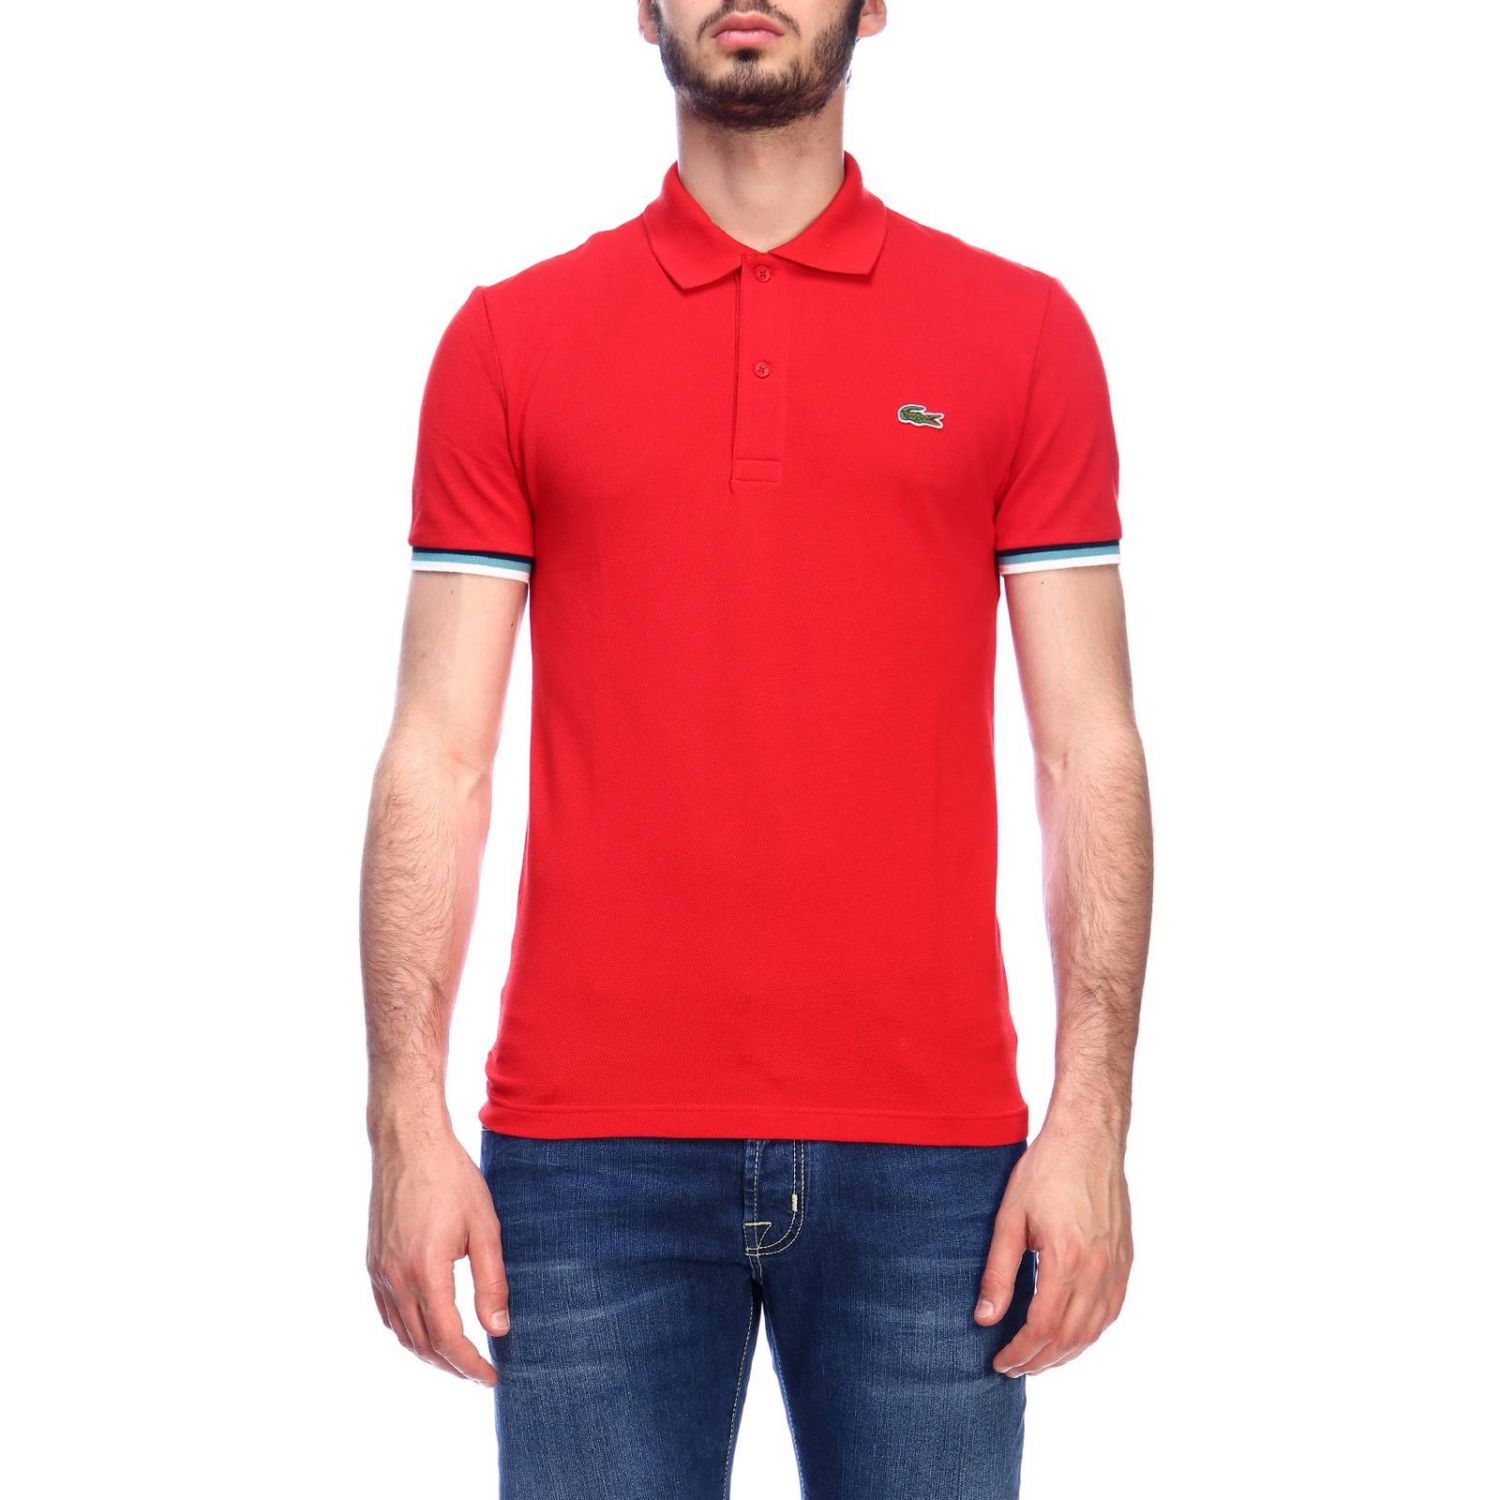 mens red lacoste t shirt